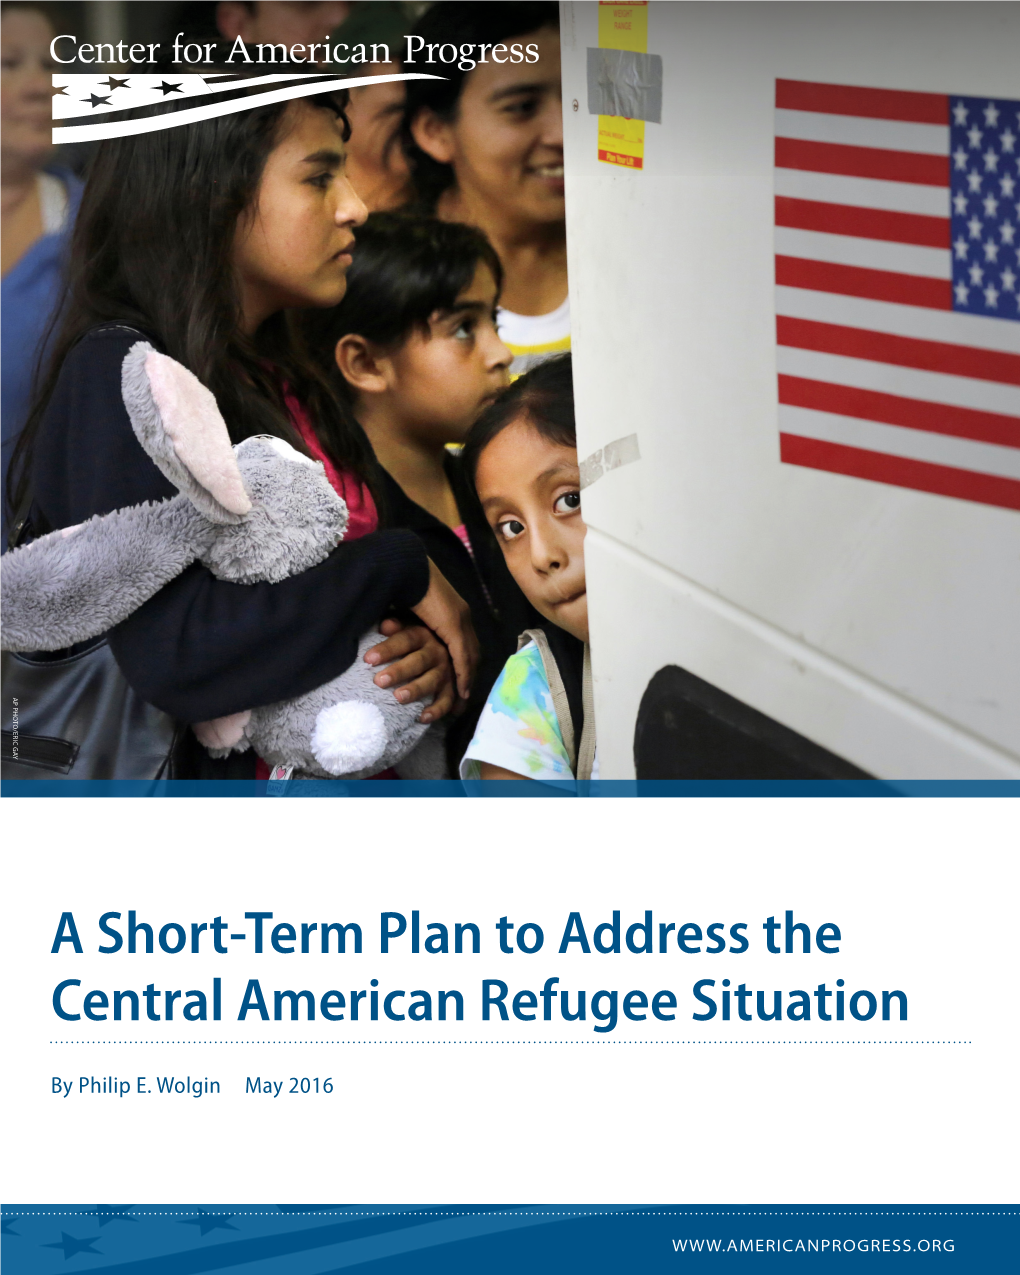 A Short-Term Plan to Address the Central American Refugee Situation